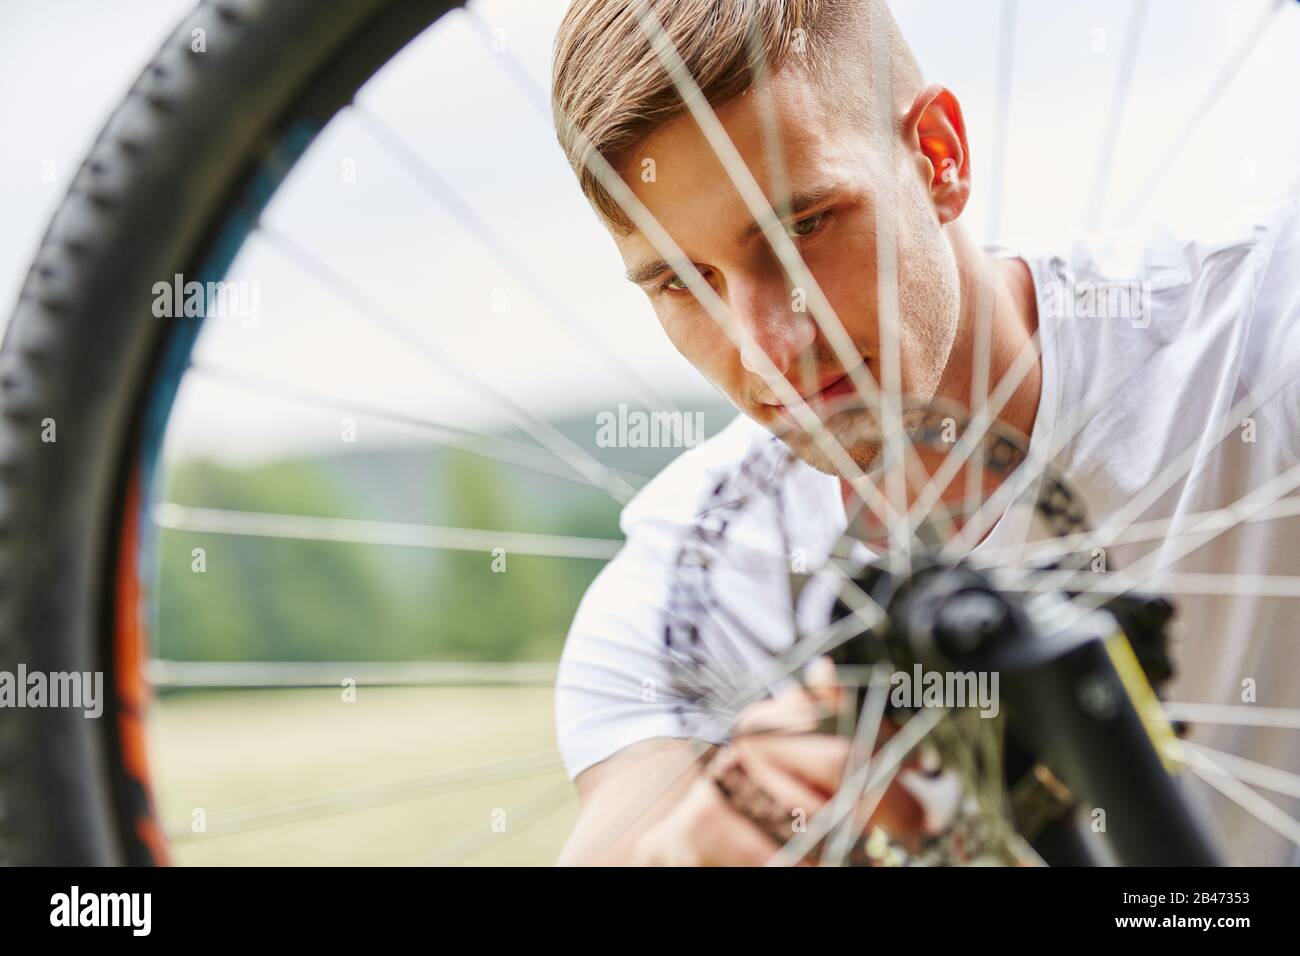 Teenage boy with flat tire while repairing bicycle in summer Stock Photo